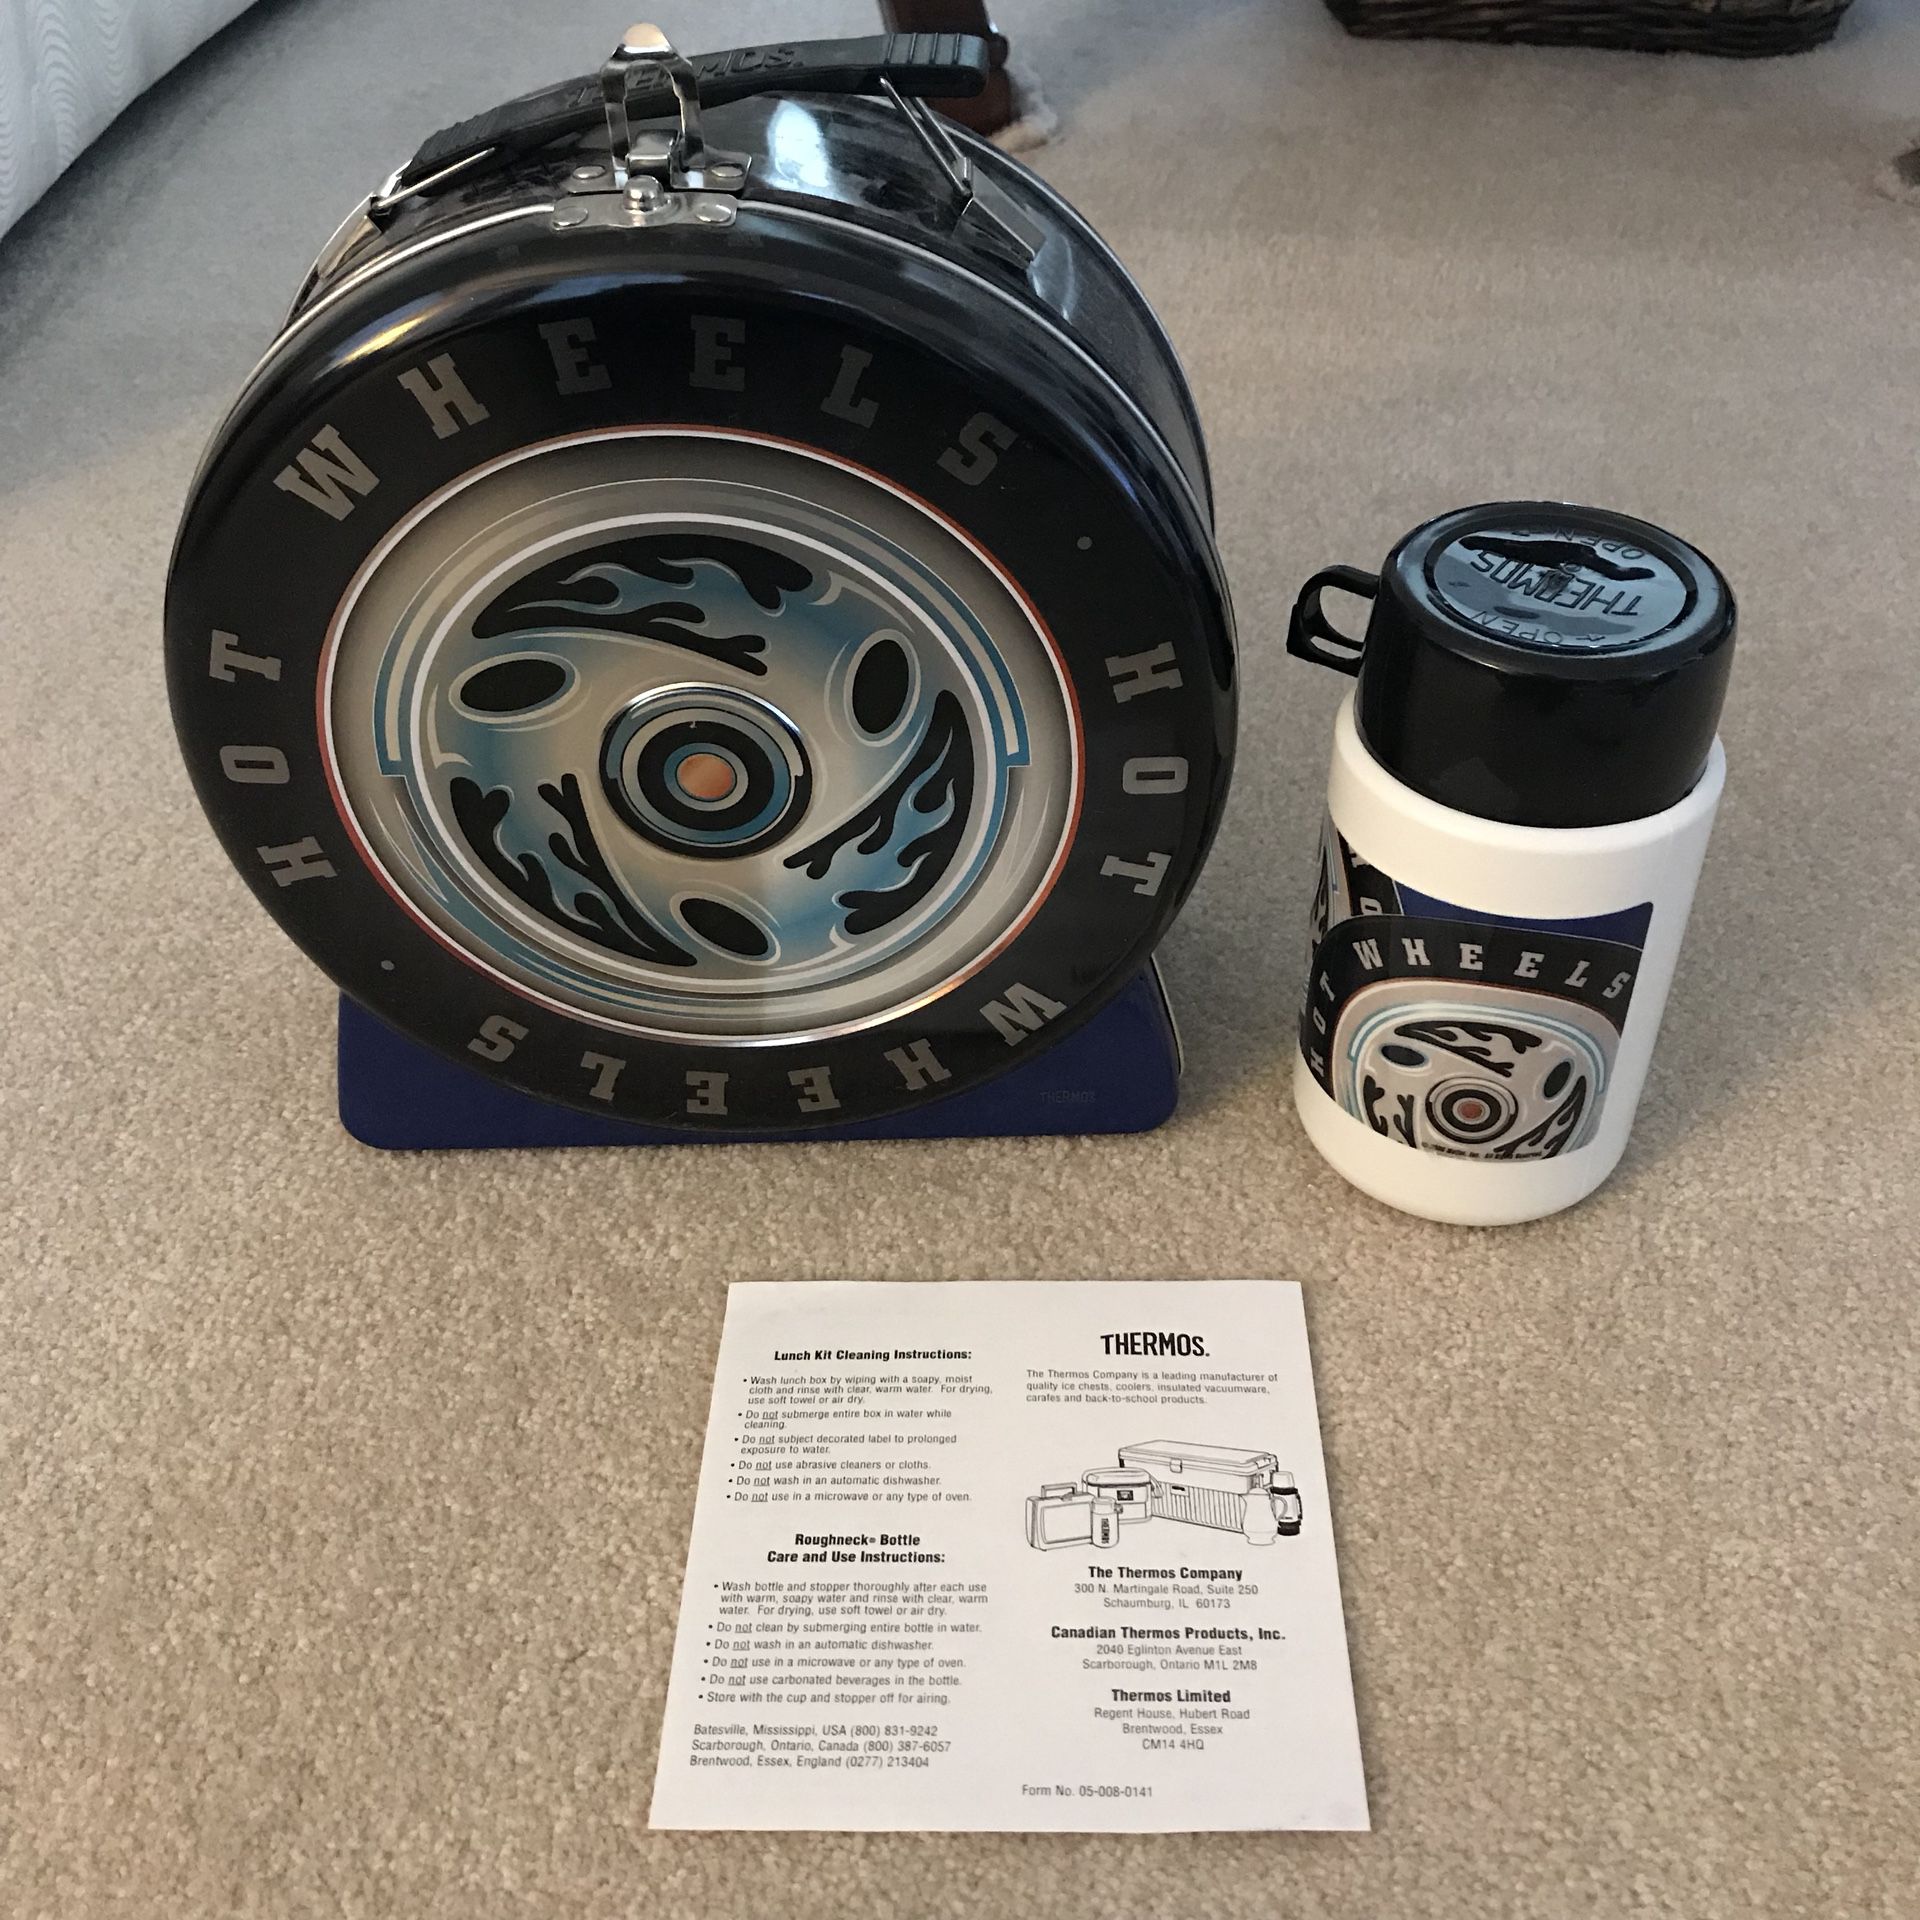 NEW hotwheels tire metal lunch box with thermos